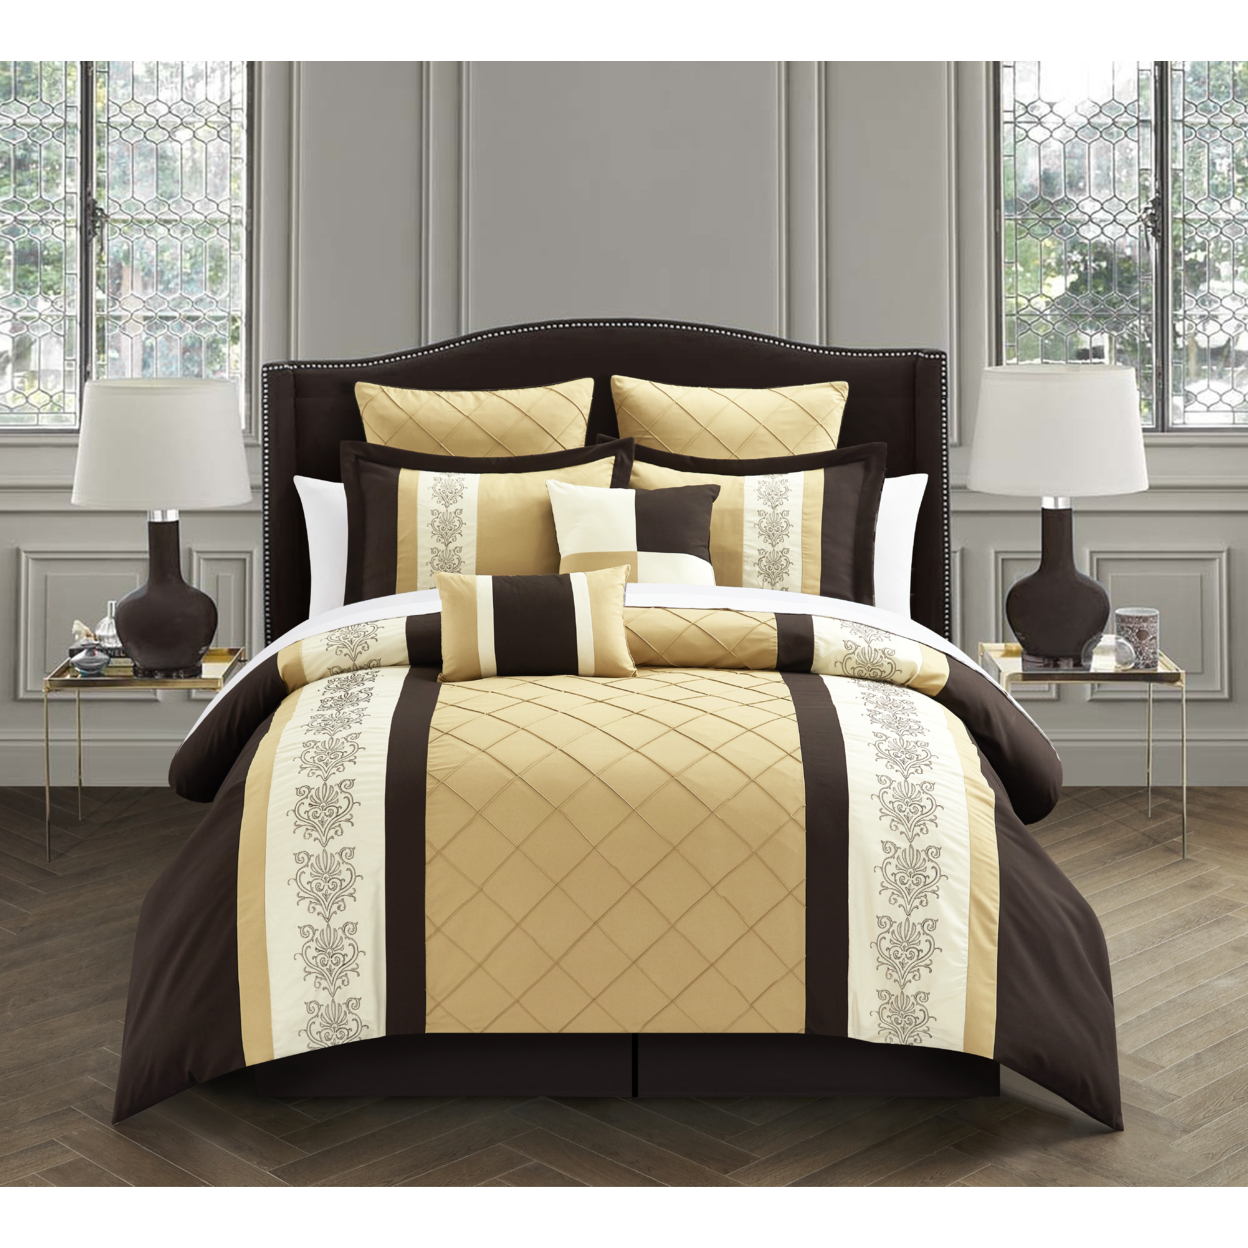 Livingston Oversized And Overfilled Comforter Set (8-Piece) - Yellow, King